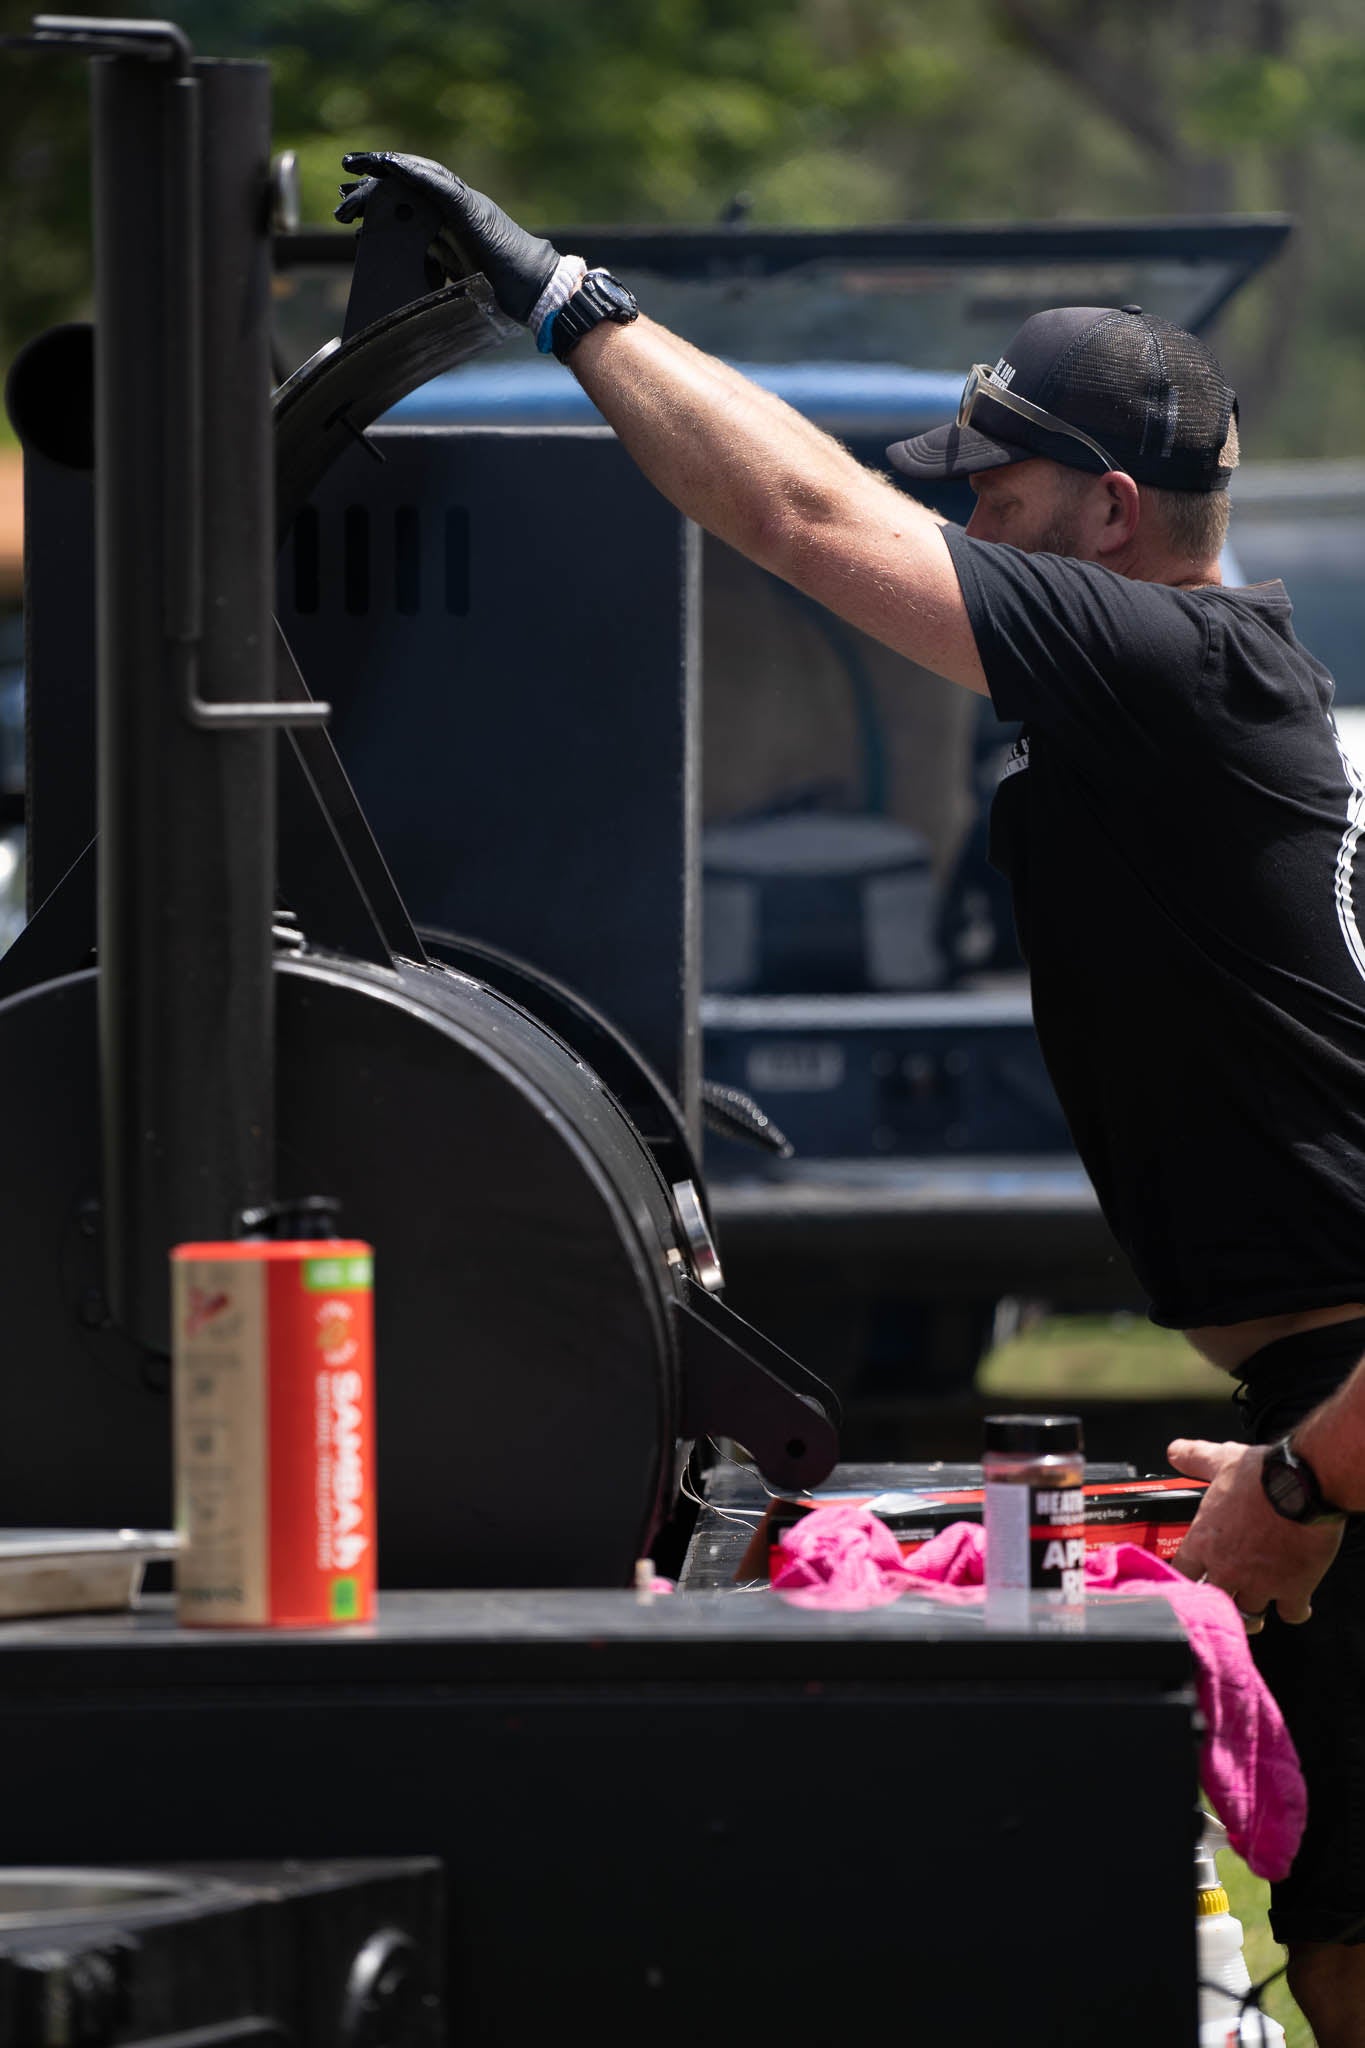 Paul from Red Smoke BBQ opening the door to the smoker, holding a tray of brisket at Smokiest GC BBQ Competition.